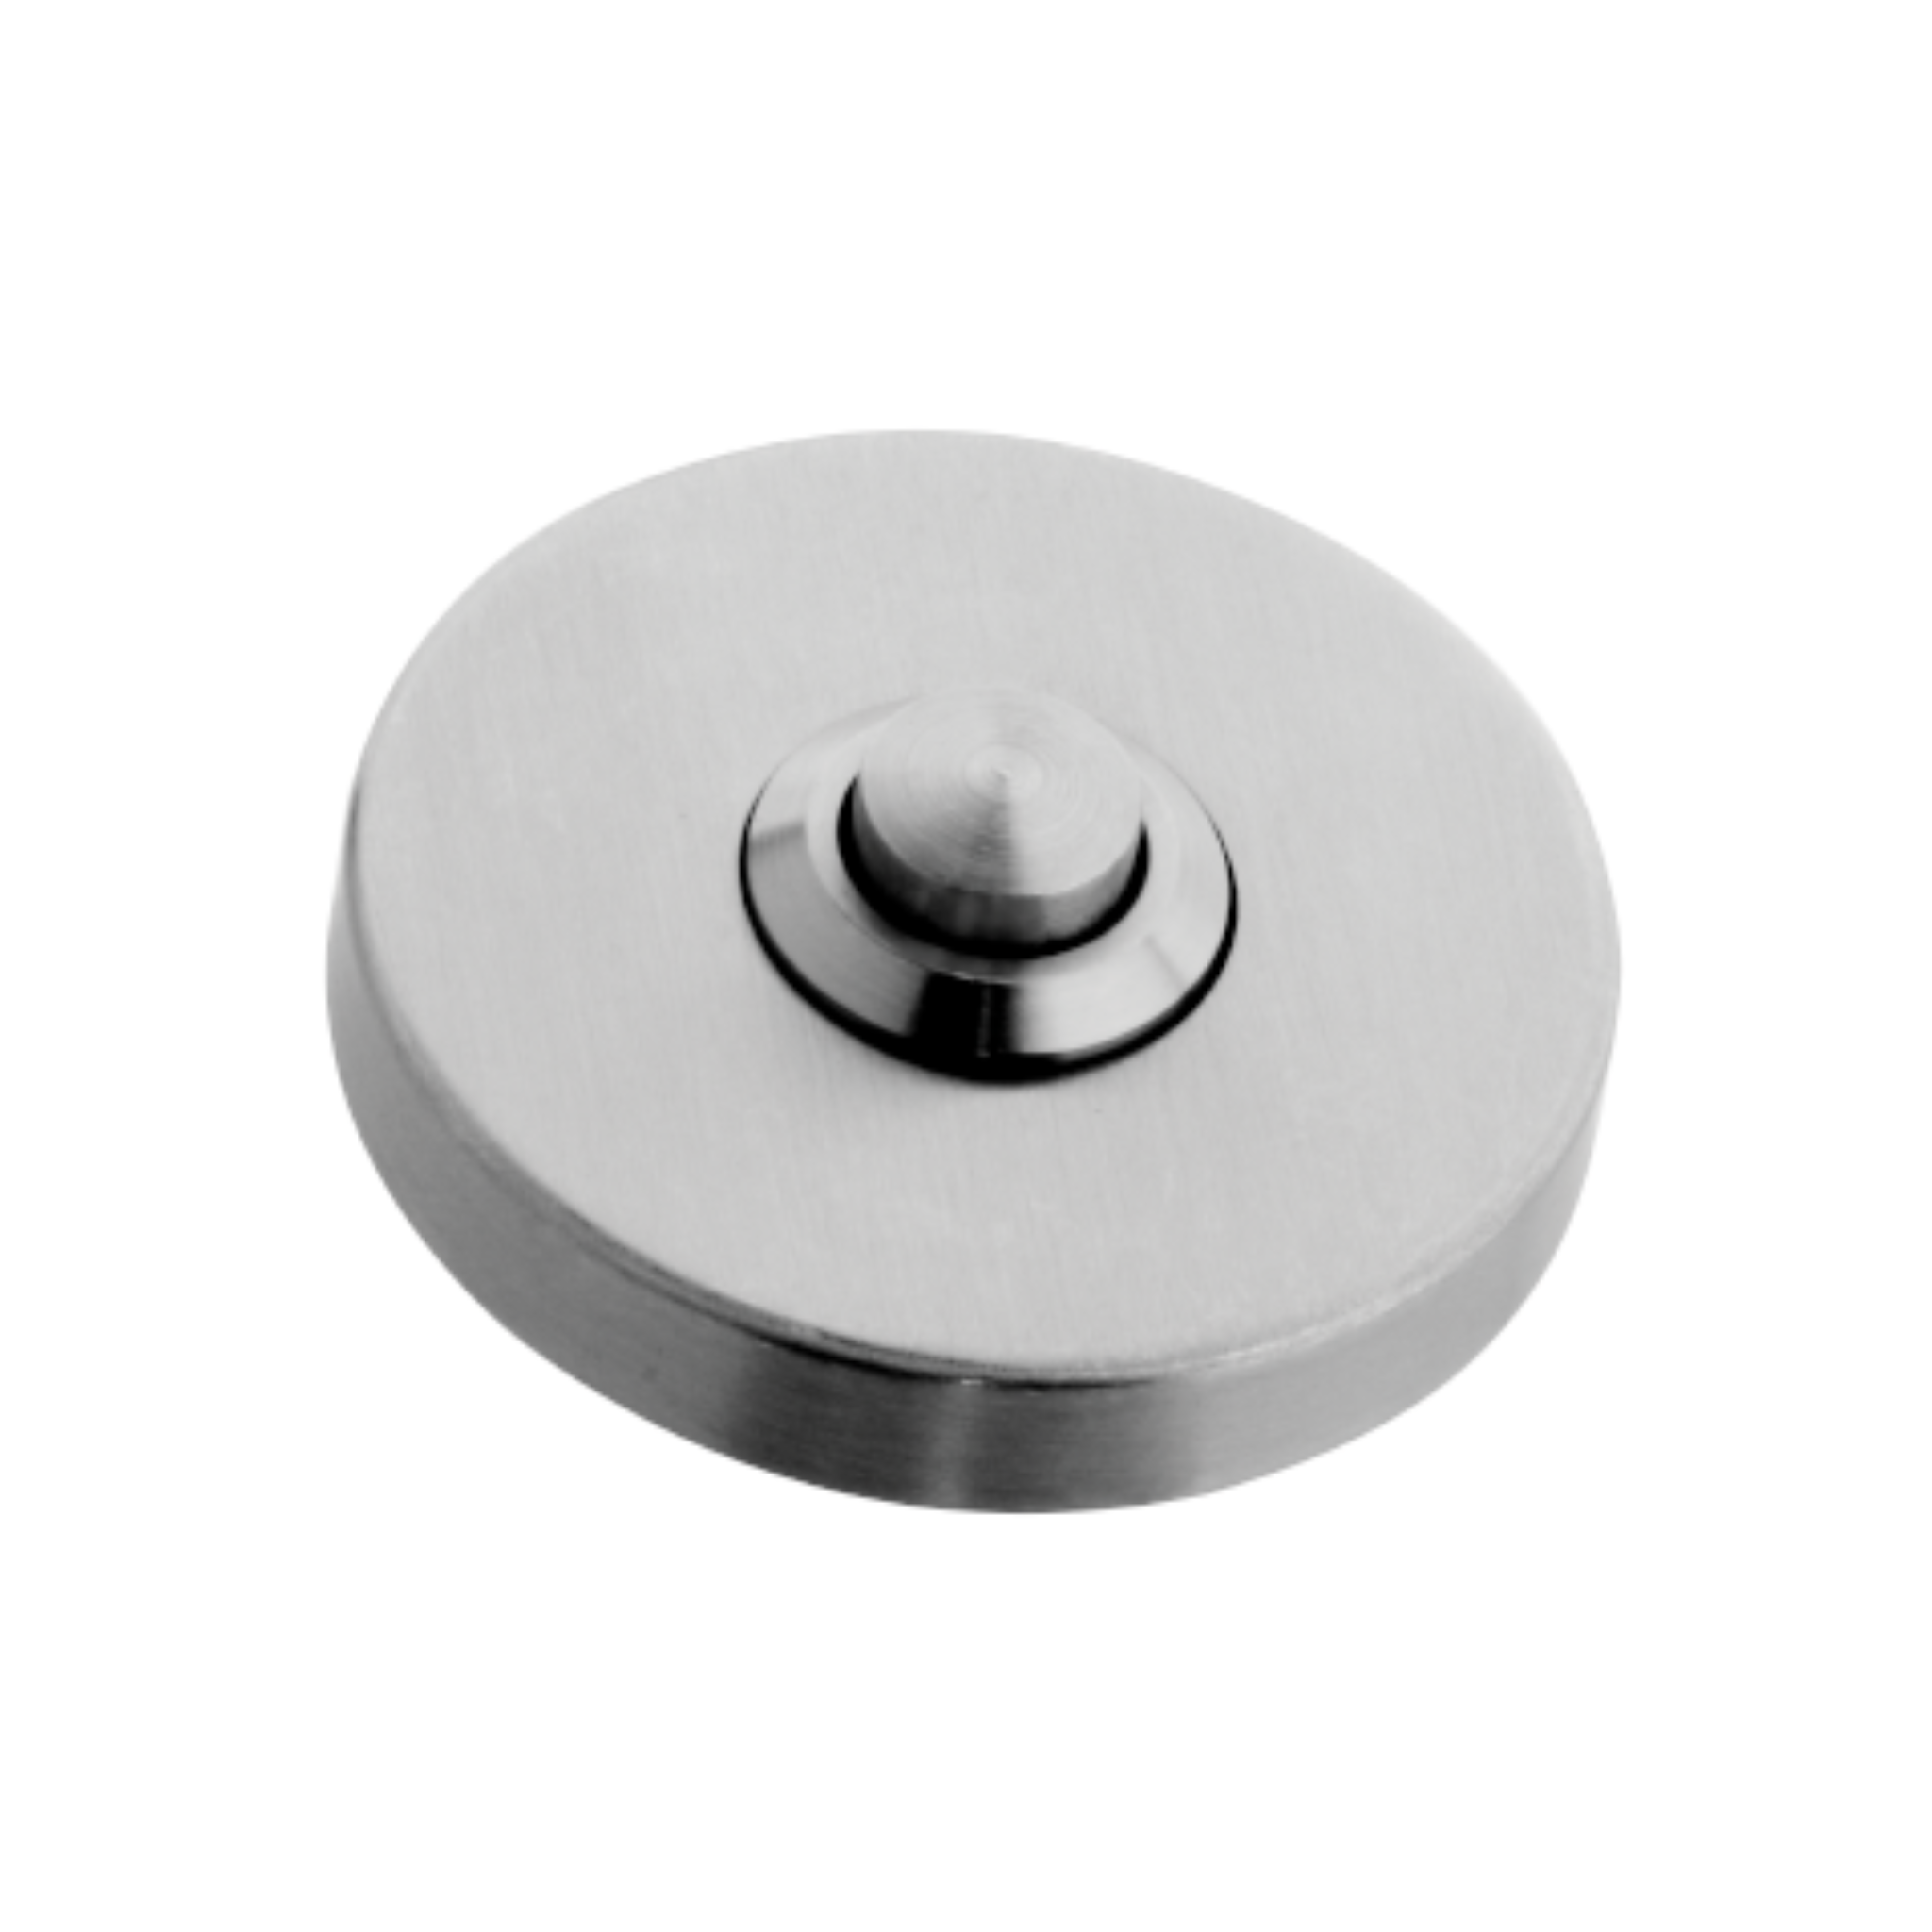 QS4465, Door Bell, 52mm (Ø), On Round Rose, Stainless Steel, QS